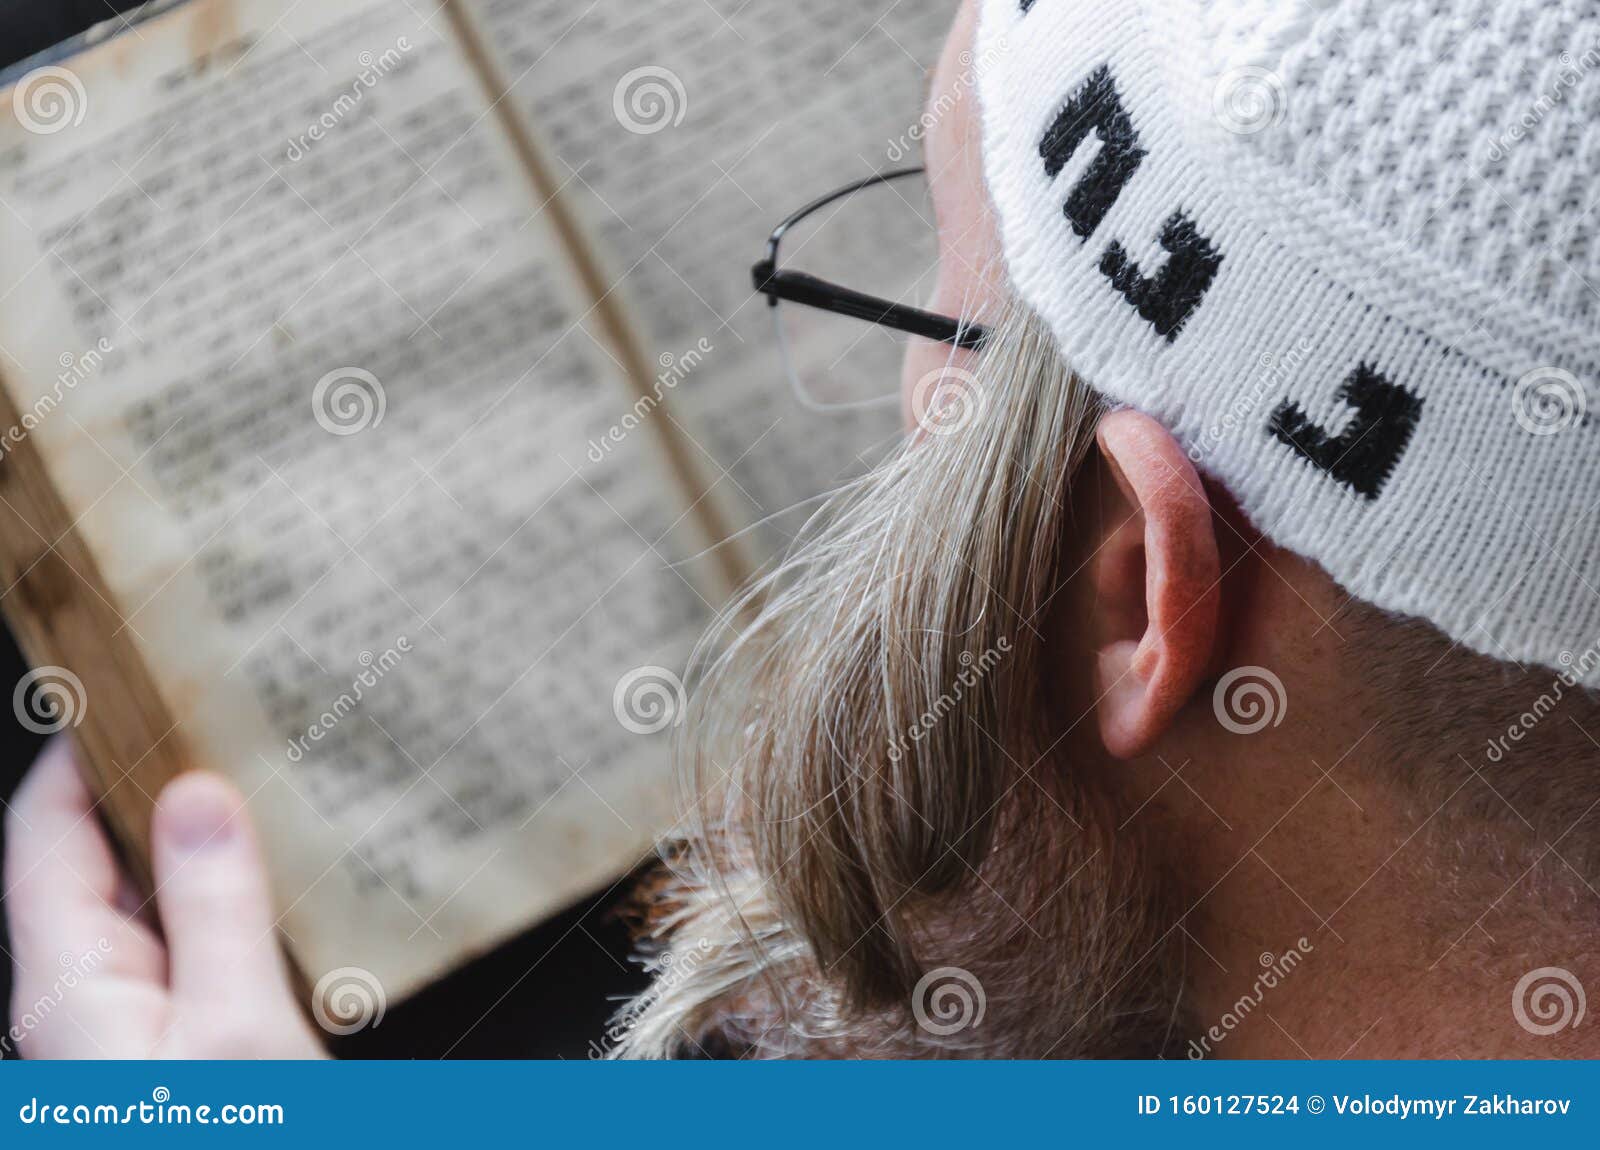 A Hasidic reads Siddur. Religious orthodox with a red beard and with pace in a white bale praying. Closeup. A Hasidic reads Siddur. Religious orthodox with a red beard and with pace in a white bale praying. On the bale is an inscription Rabbi Nahman from Uman. Close-up.